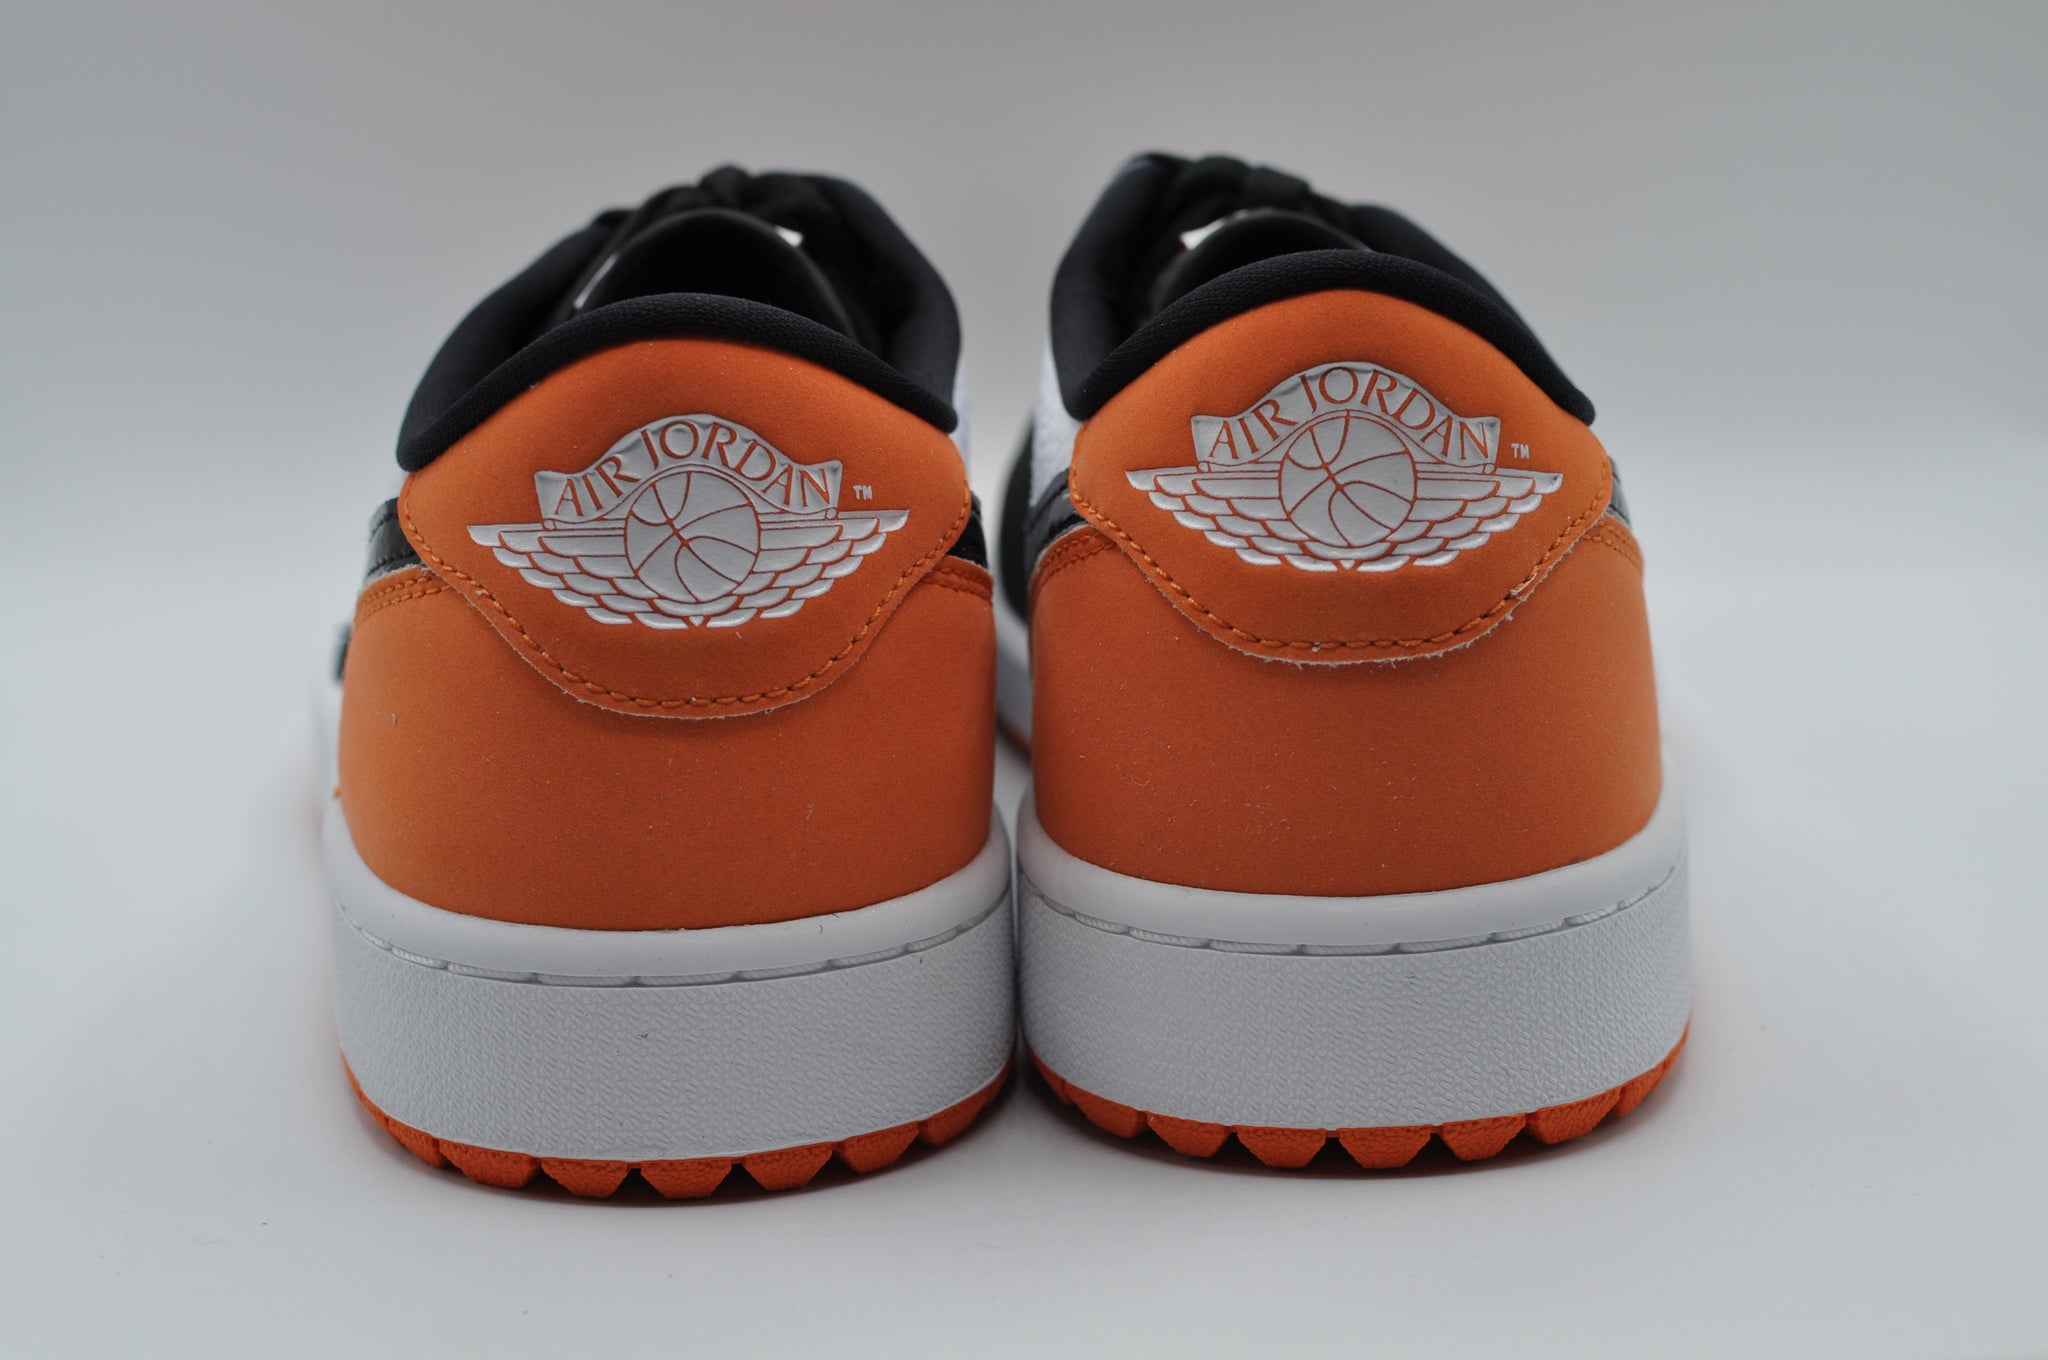 Air Jordan 1 Low Golf Shattered Backboard OUT NOW: Release Date, Price, And  Where To Buy